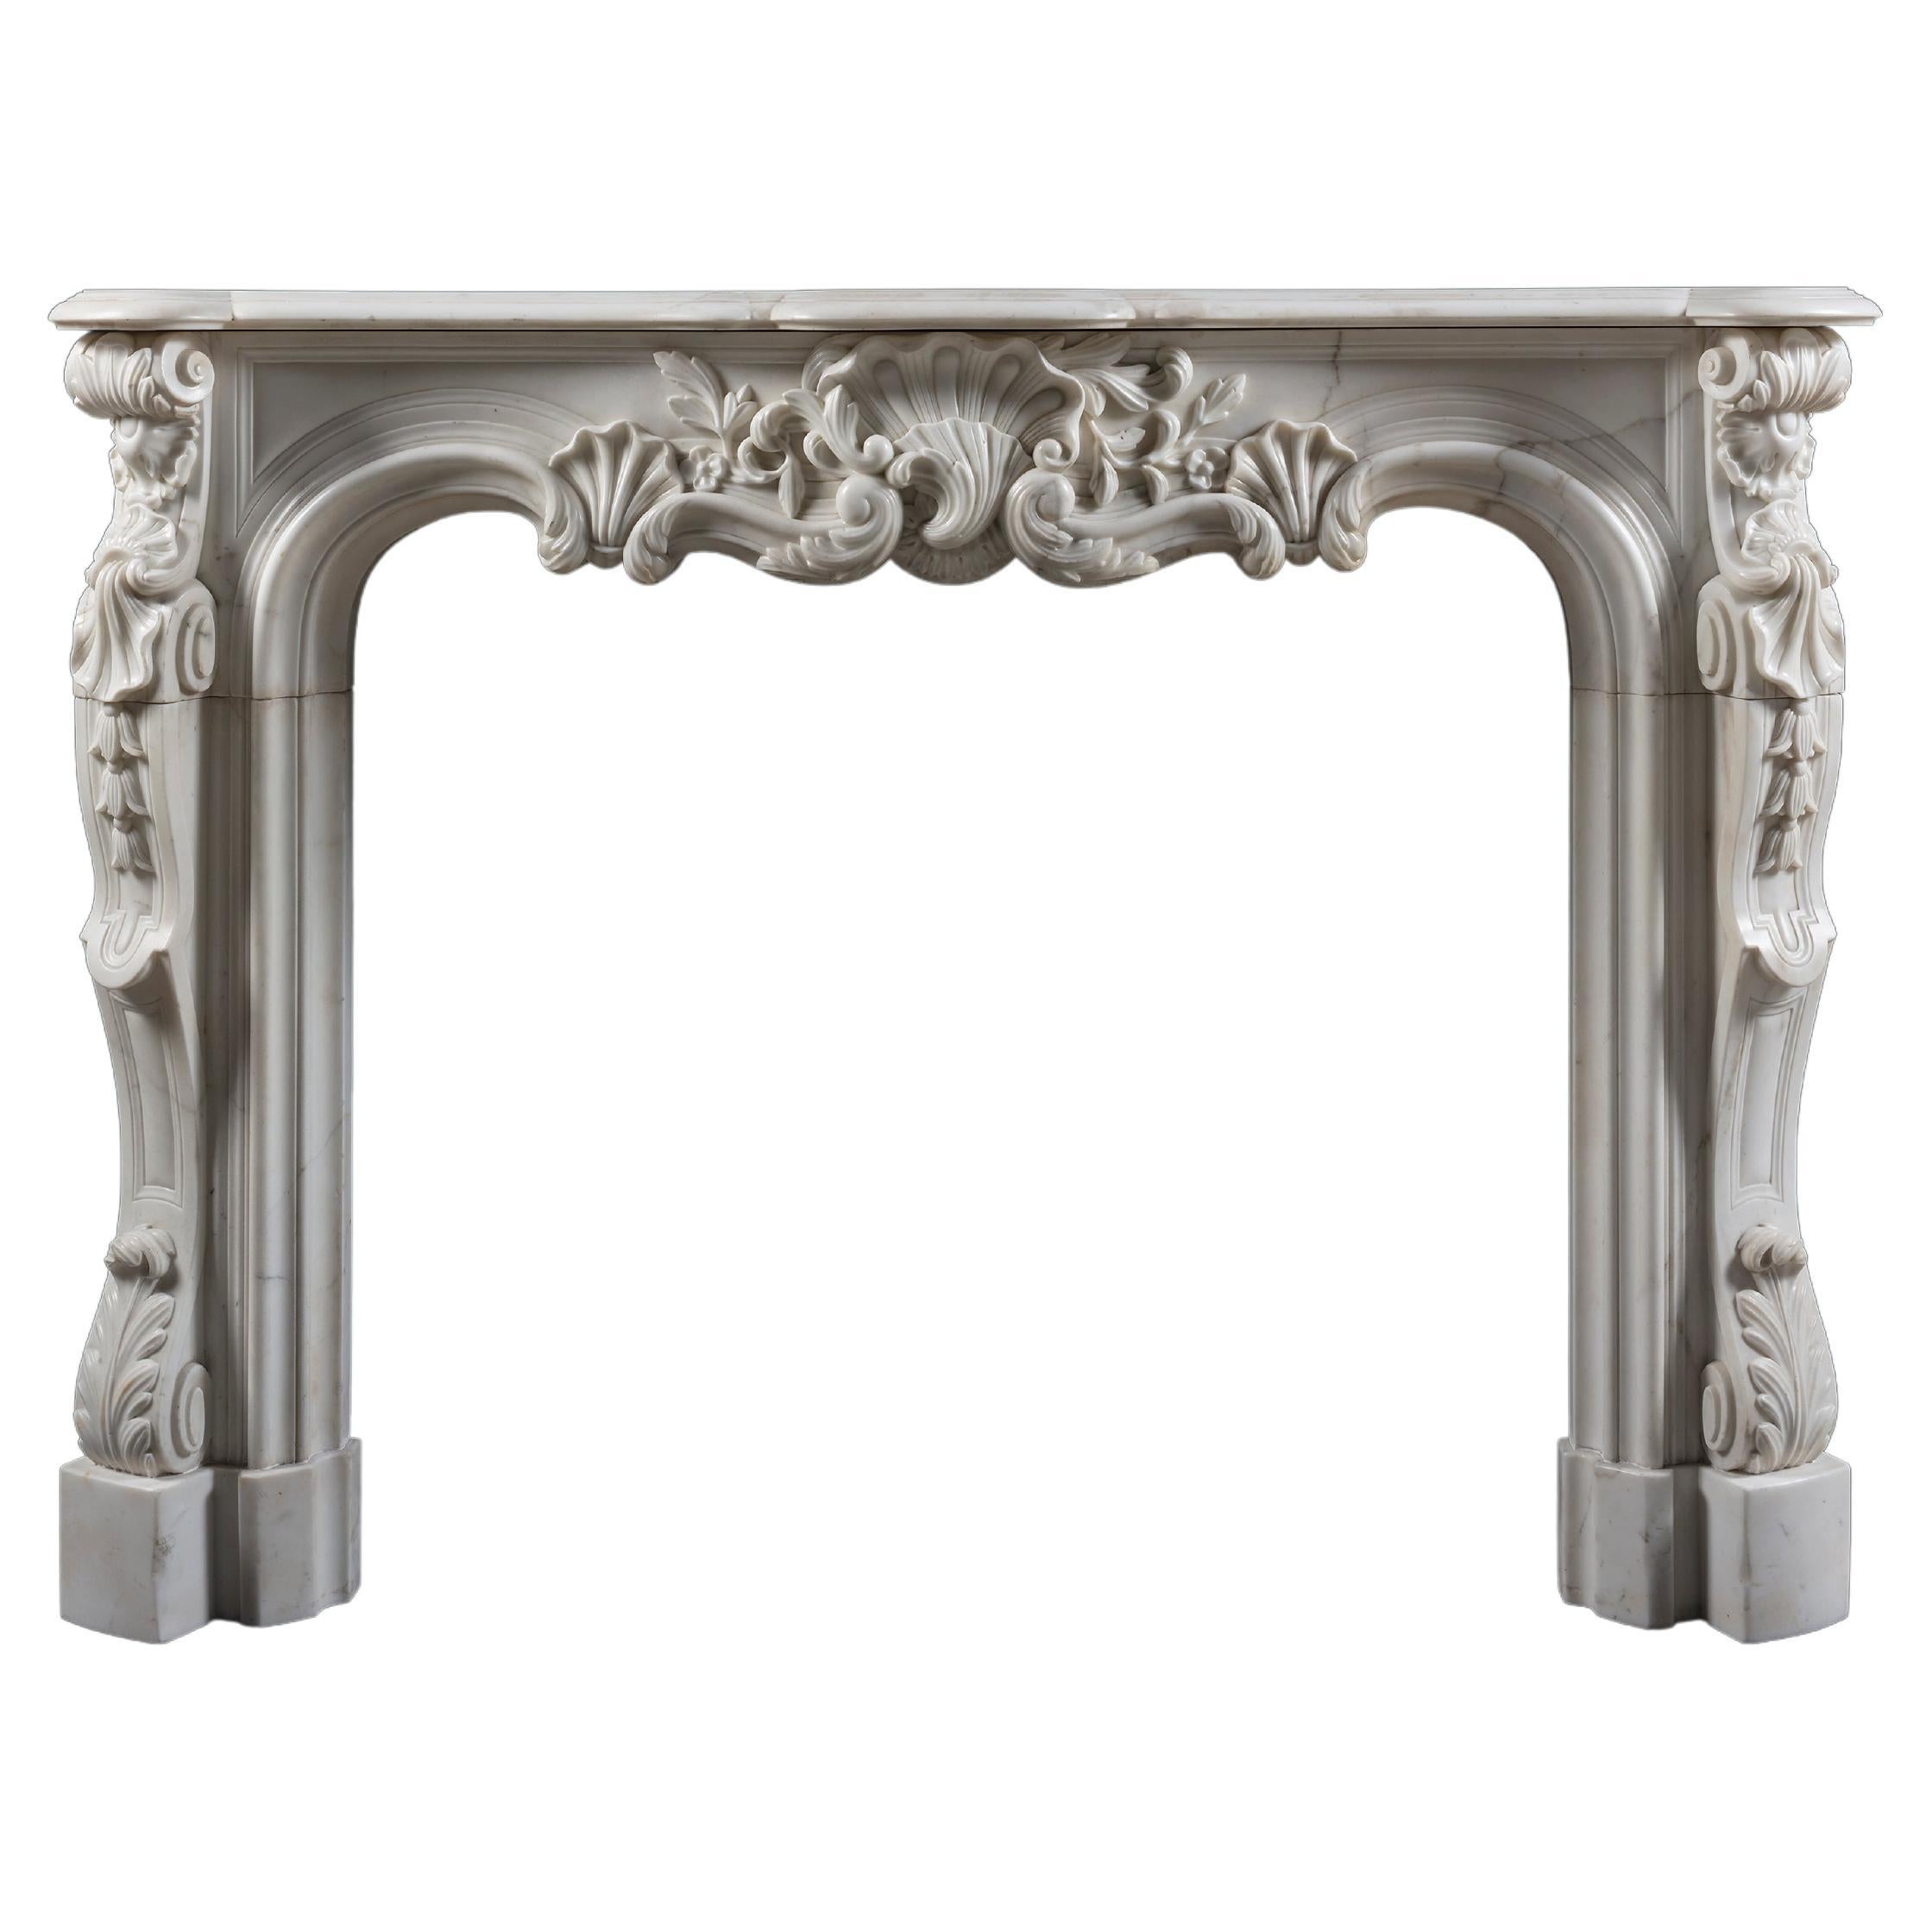 A 19th Century Rococo Chimneypiece in Louis XV Style For Sale